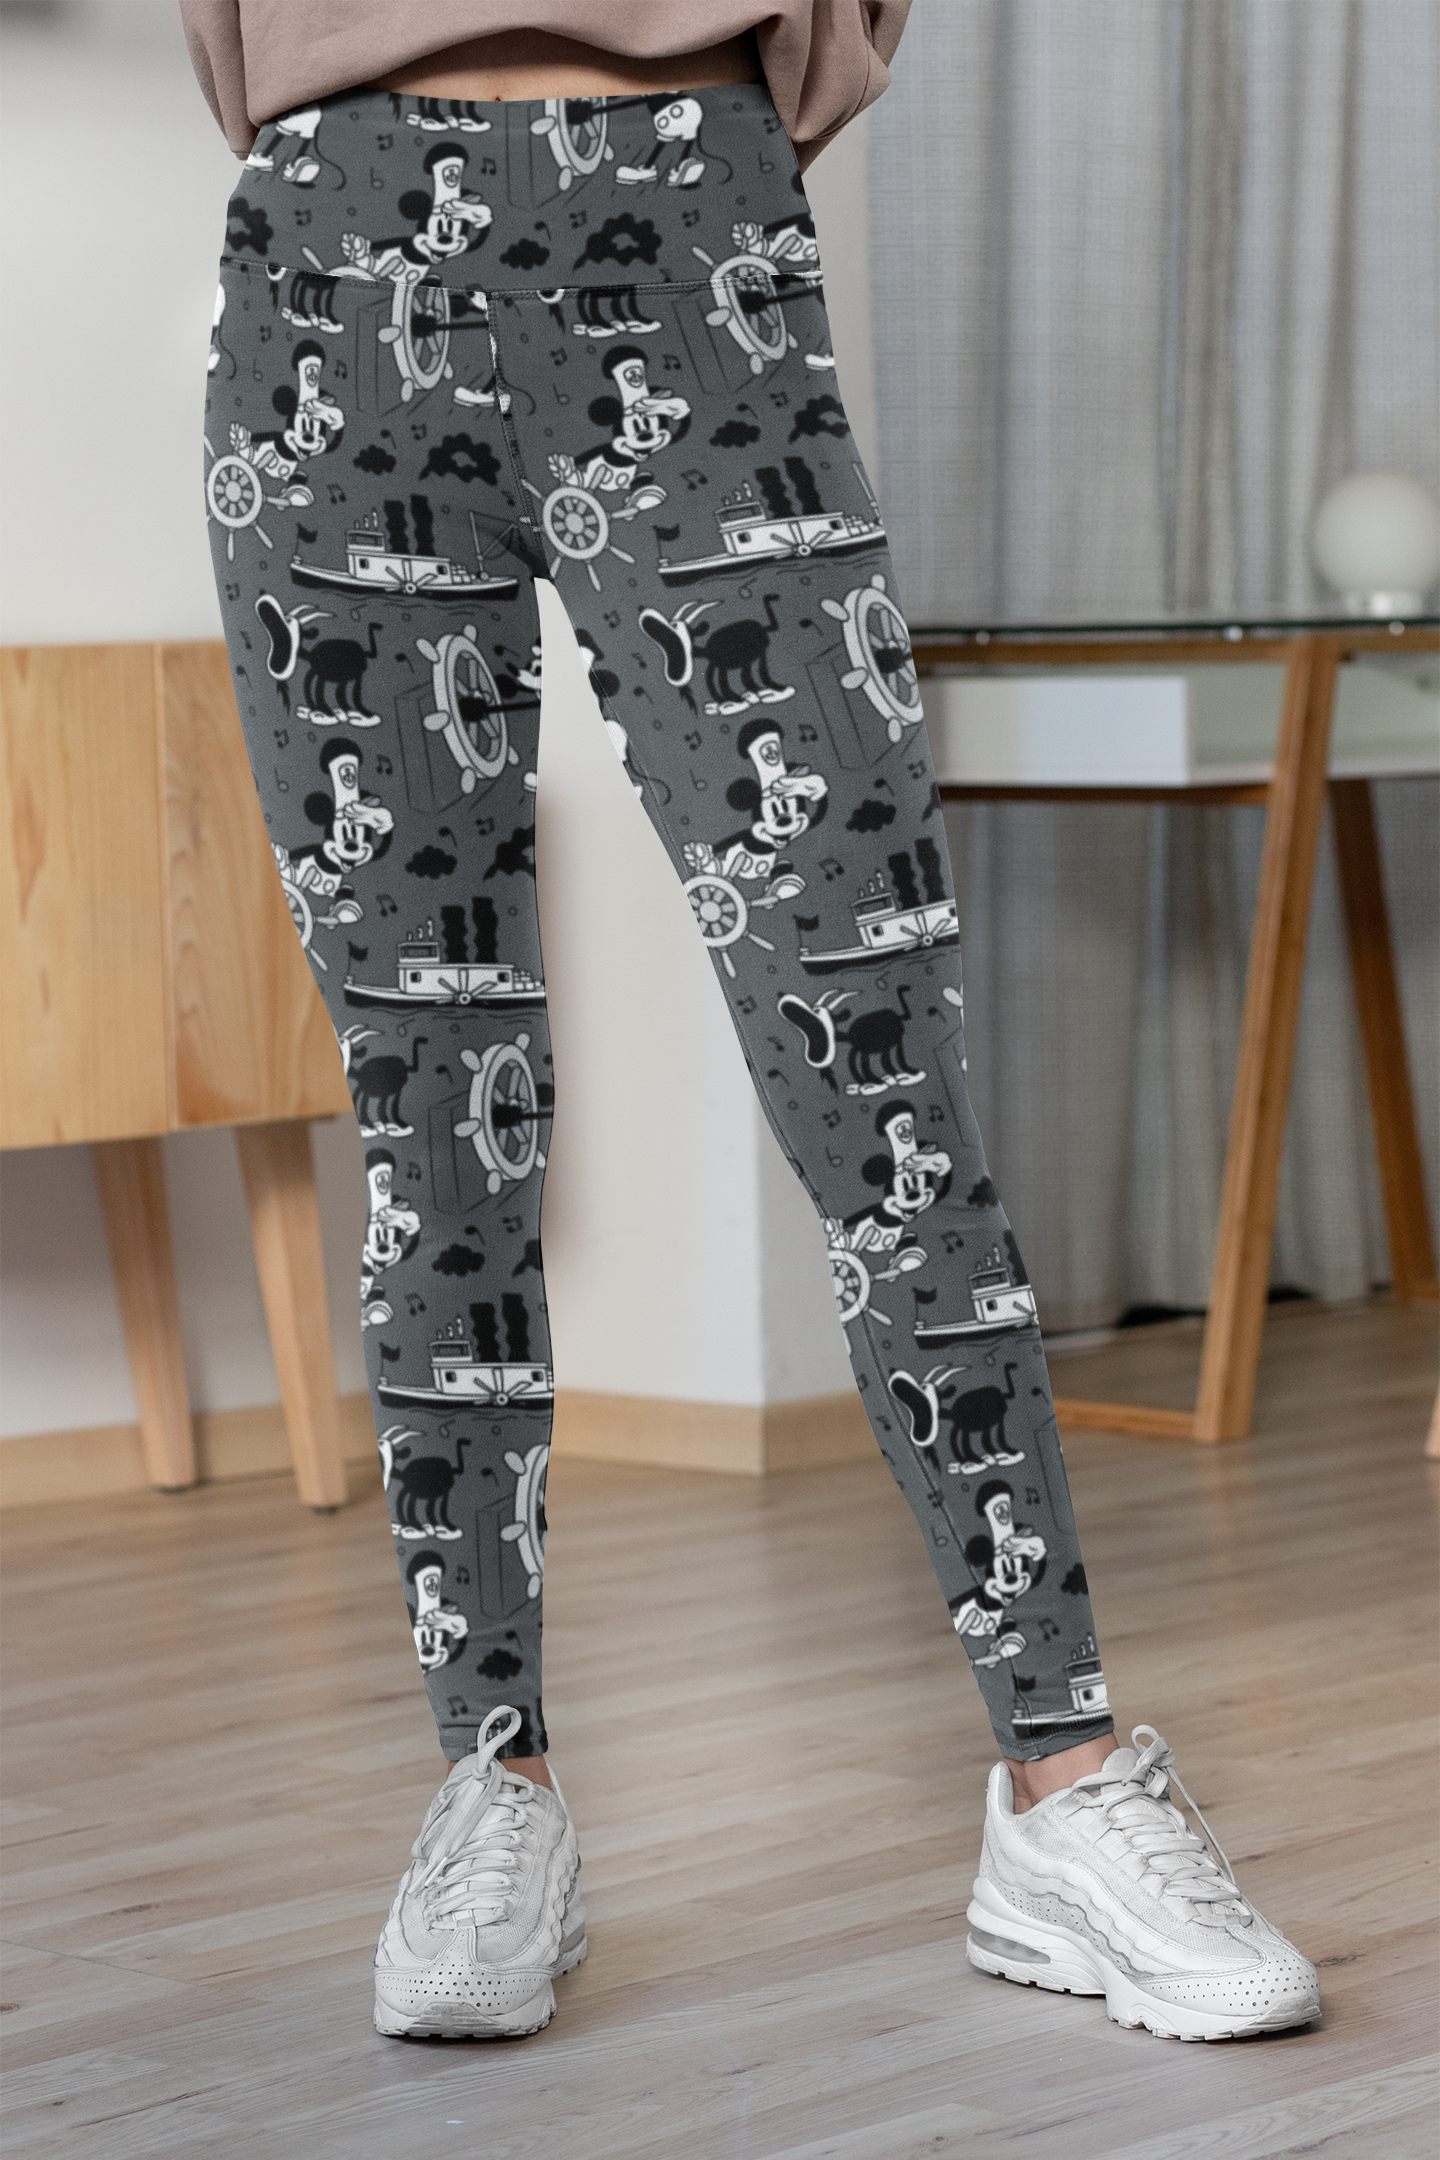  Sustainable Style and Travel - Global Street Fashion  and Eco Friendly Style - Mickey Mouse Leggings at Lovely Sally